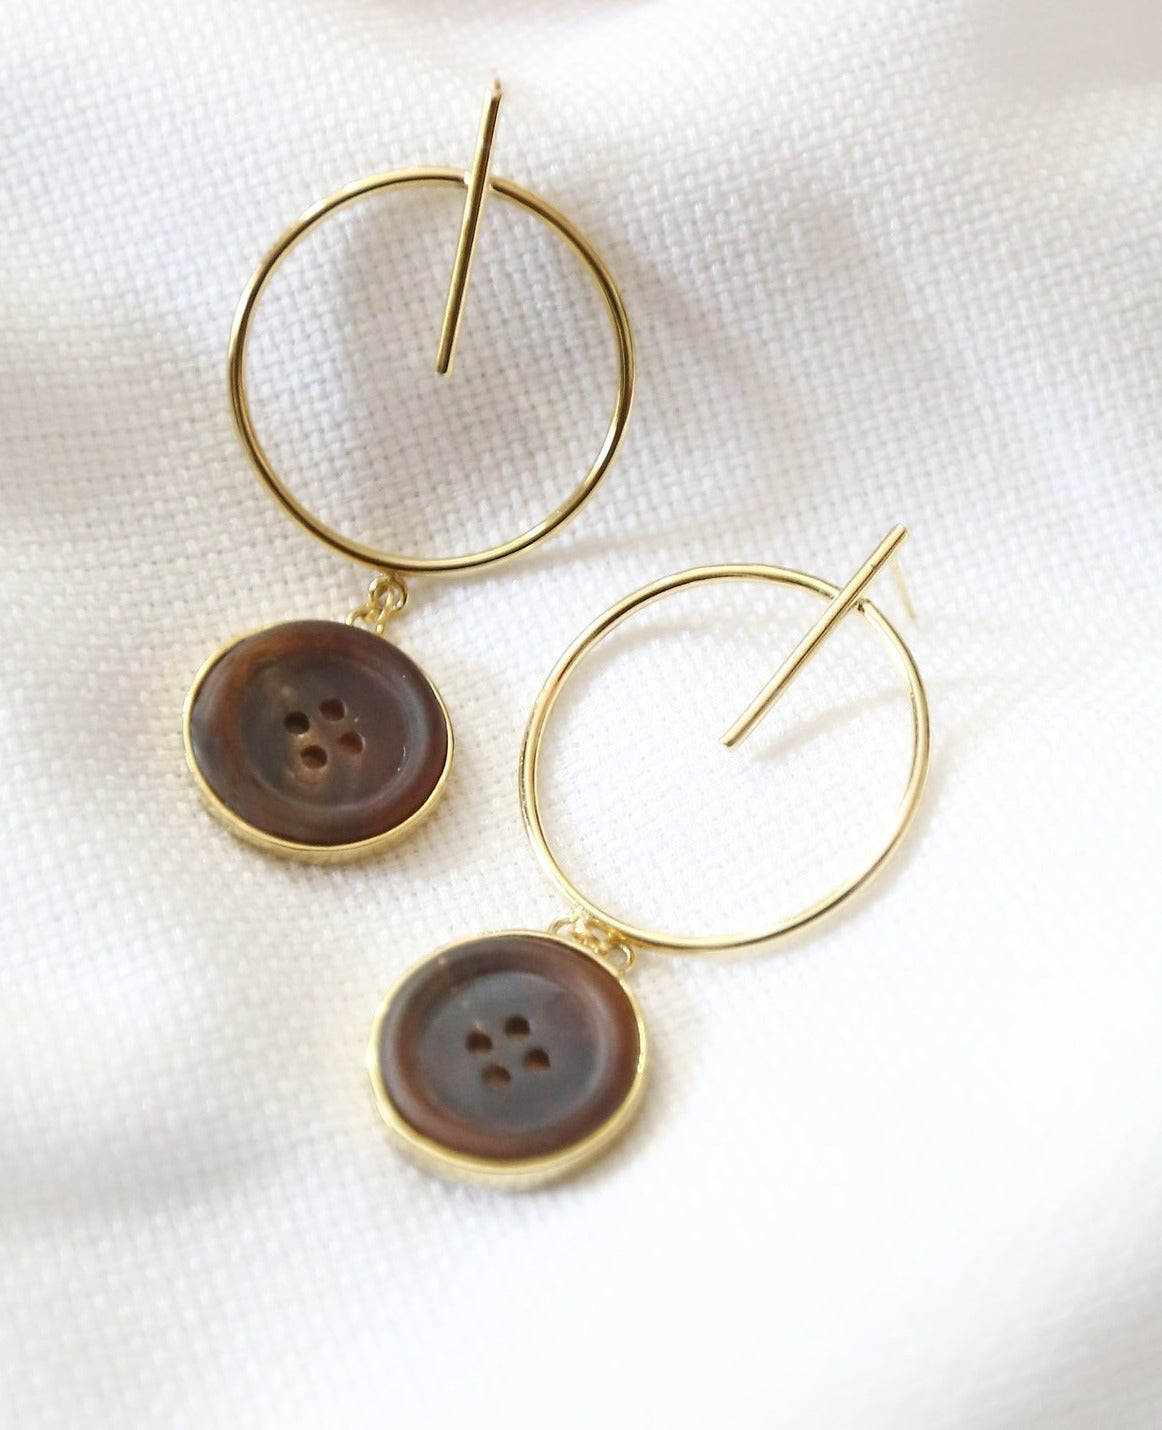 Hoop and drop earring made out of gold plated nickel-free brass.